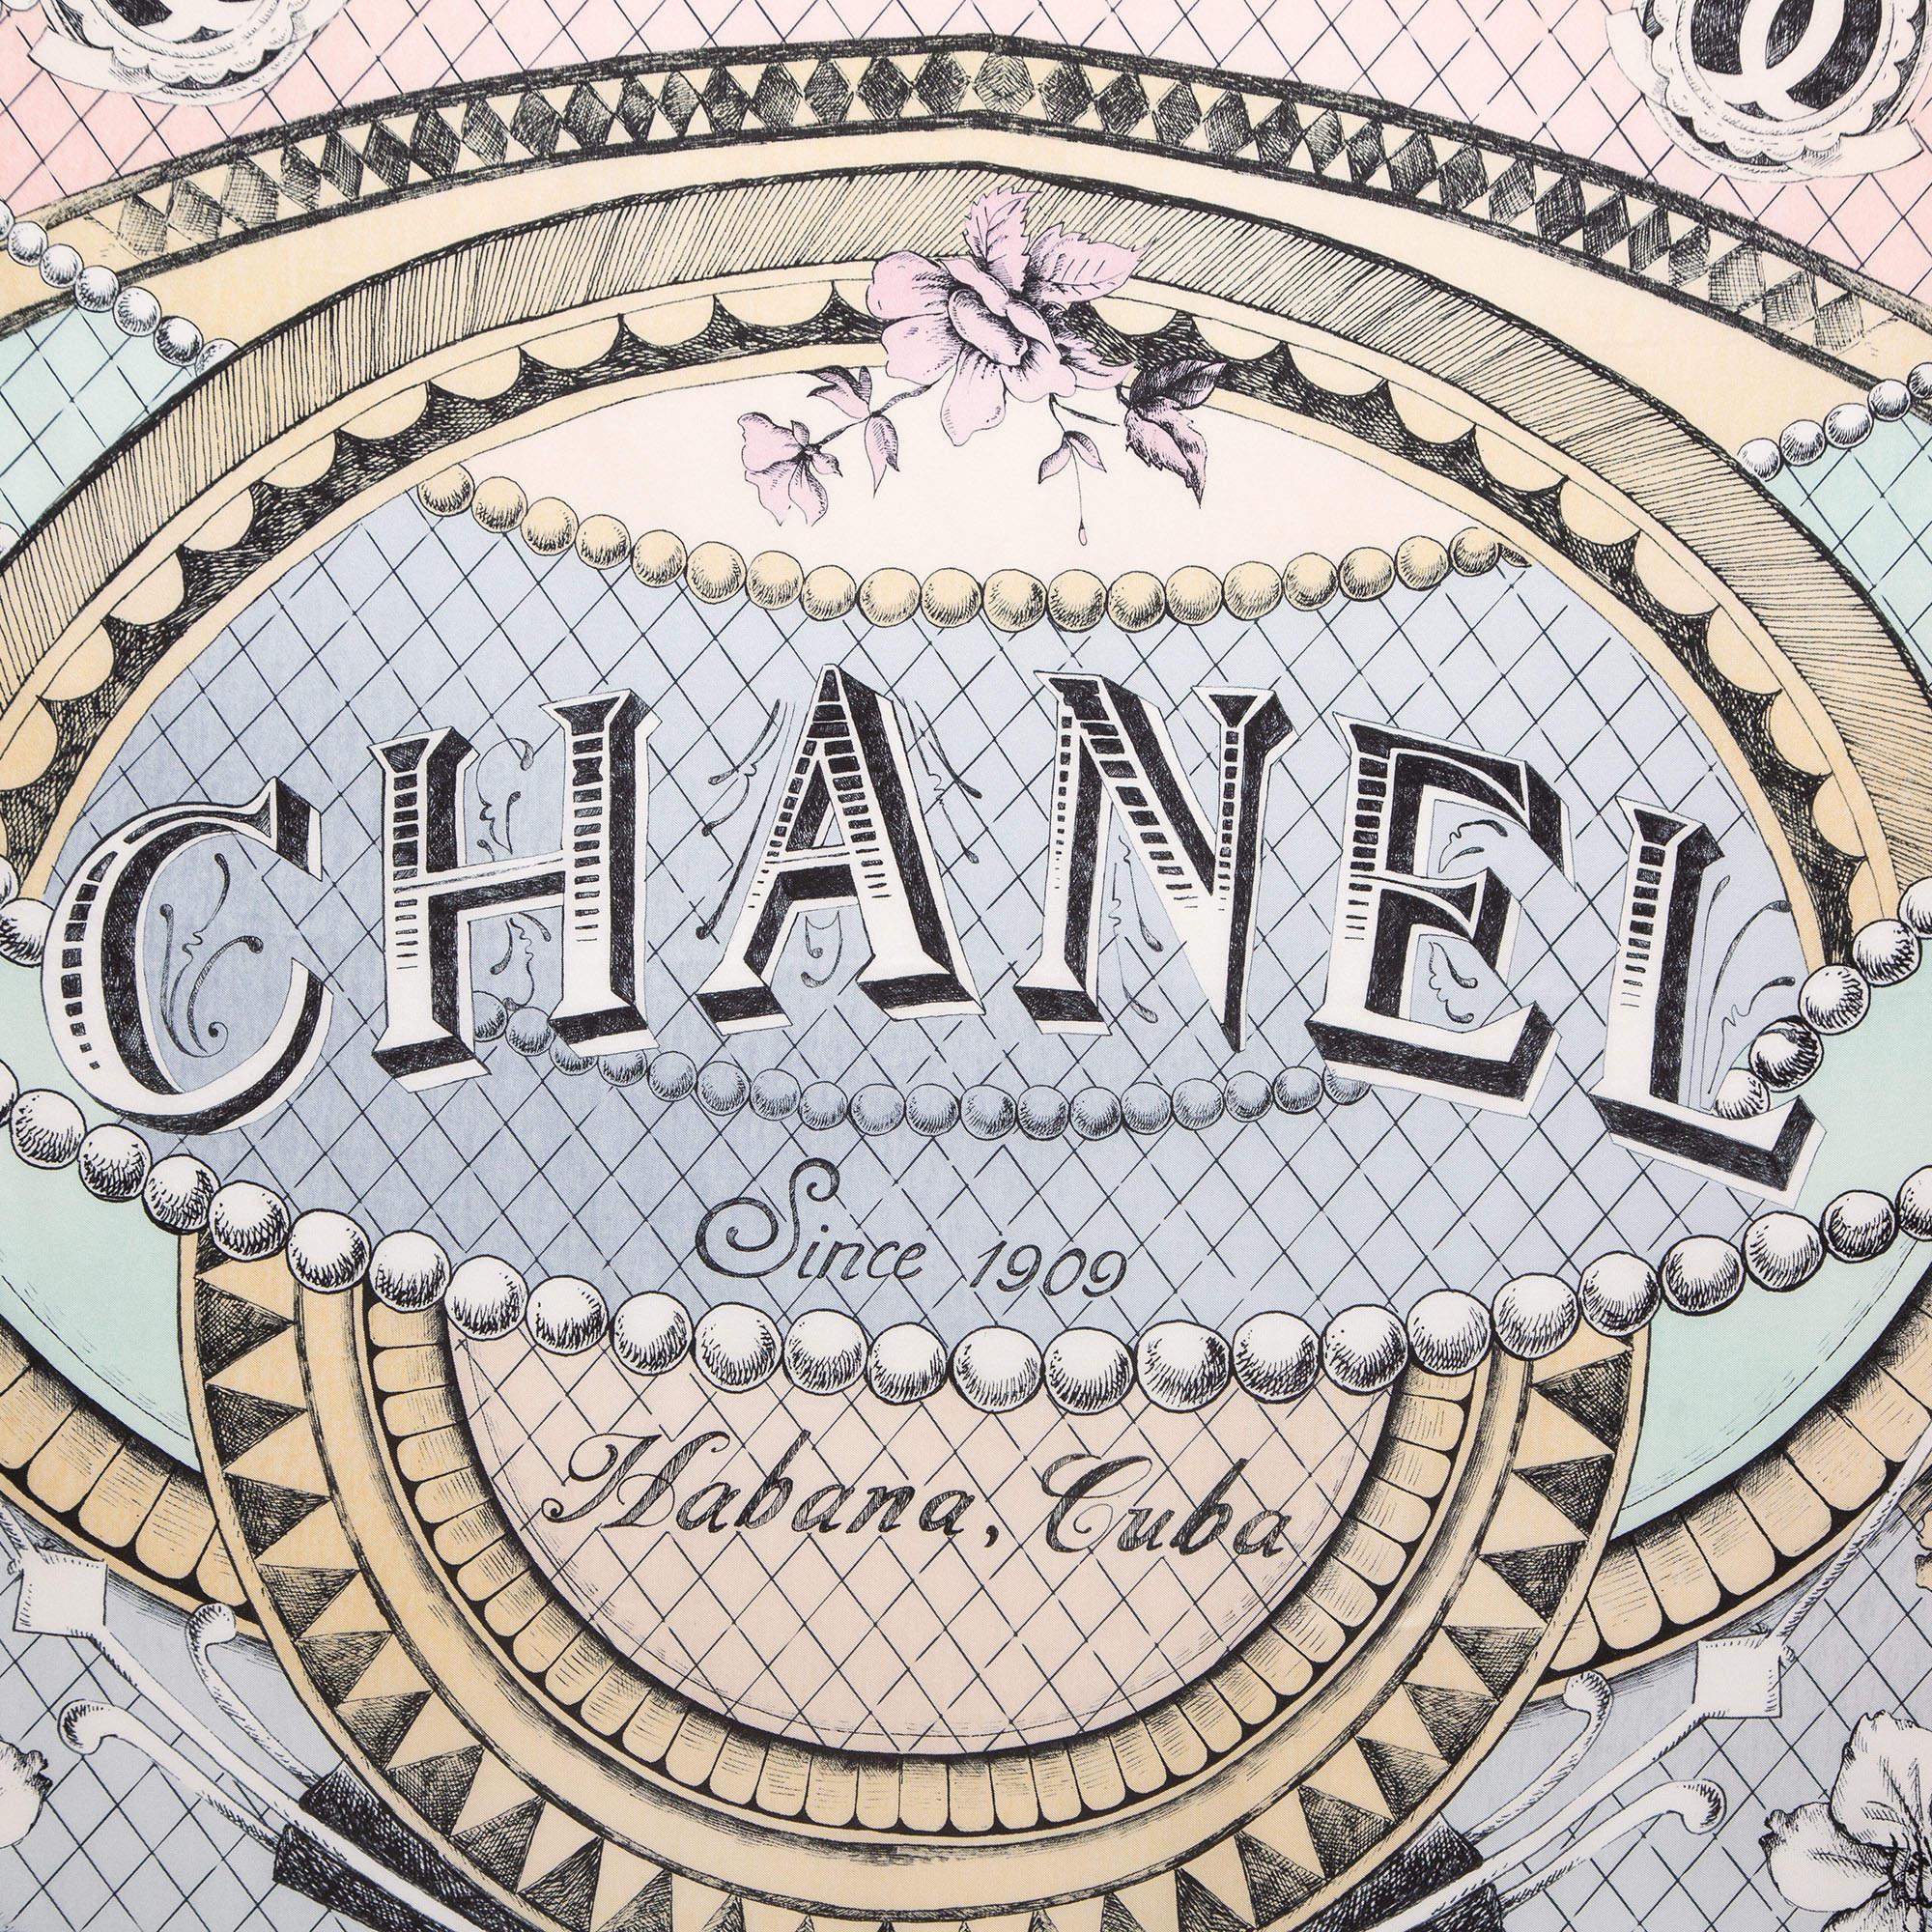 For days when you want your accessory to express your style, this Chanel scarf is perfect. It carries a gorgeous shade and is created from quality fabrics for a luxurious feel.

Includes: Original Box